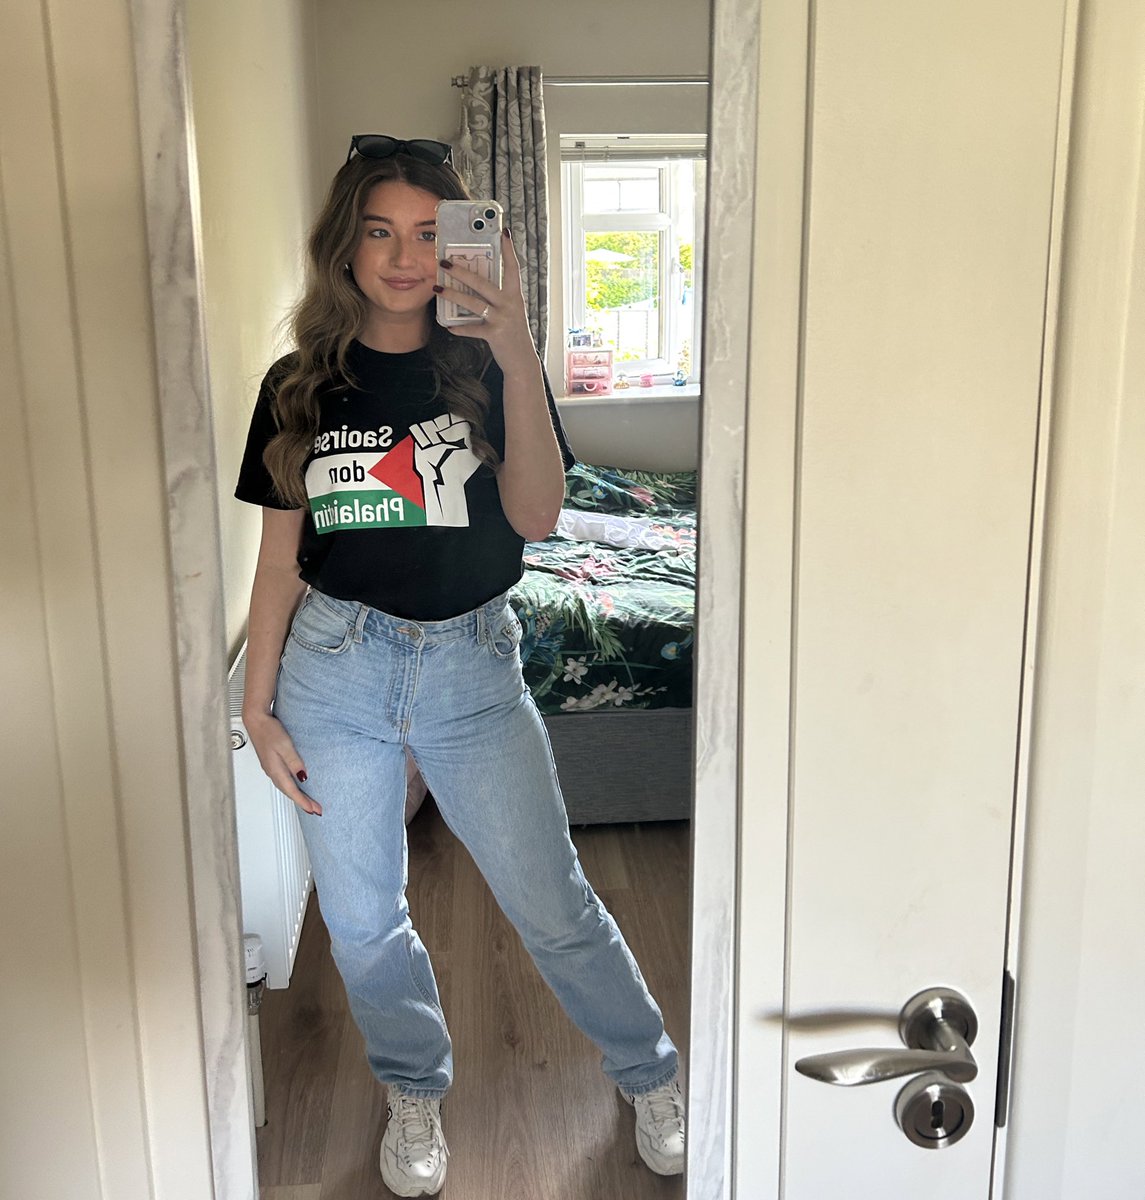 Off to Dalymount to support the Palestinian women’s team 🇵🇸#FreePalestineNOW